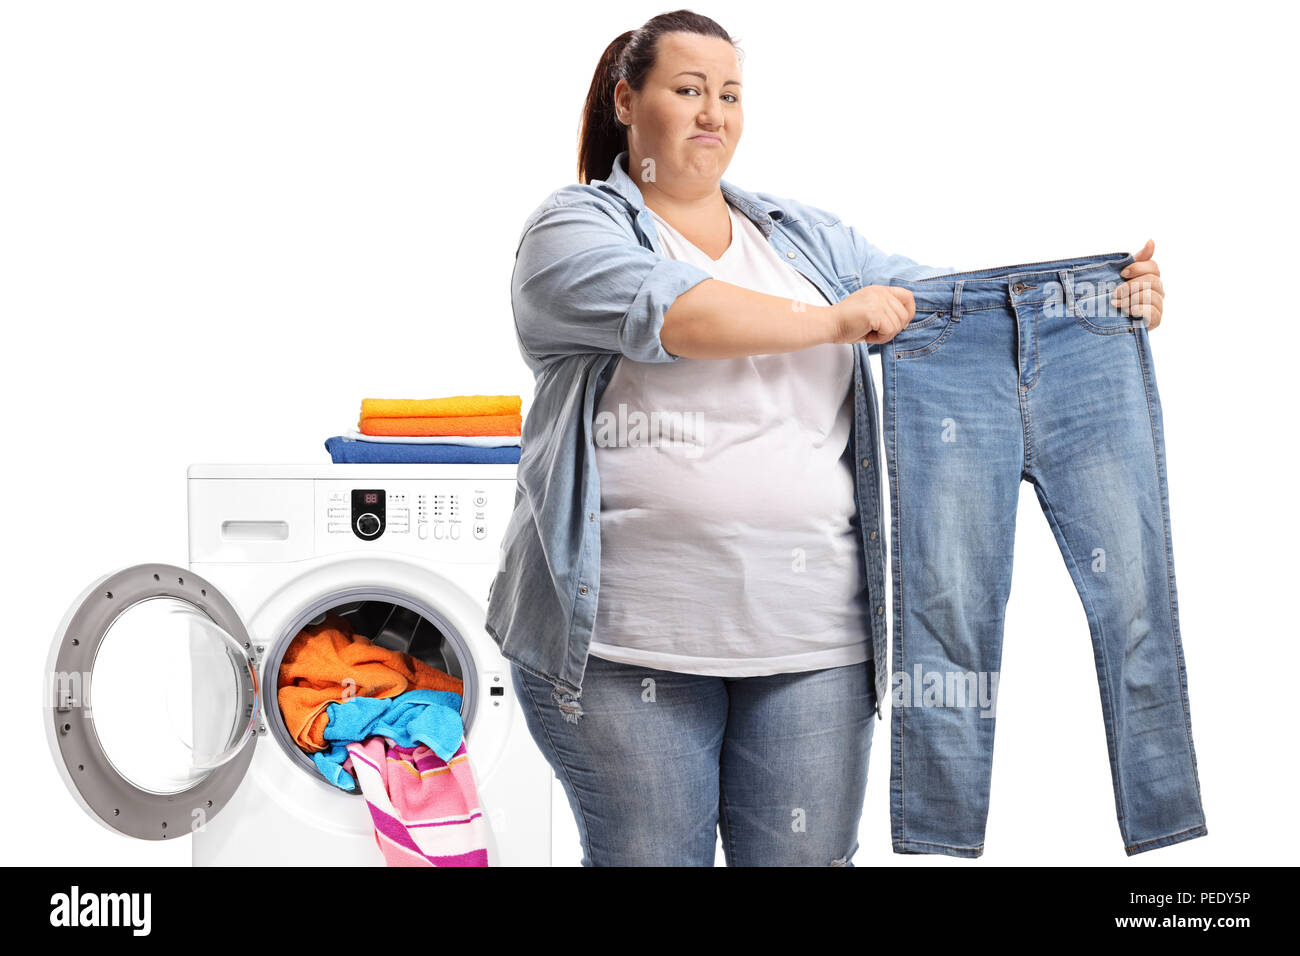 Disappointed young woman holding a pair of shrunken jeans with a washing machine behind her isolated on white background Stock Photo